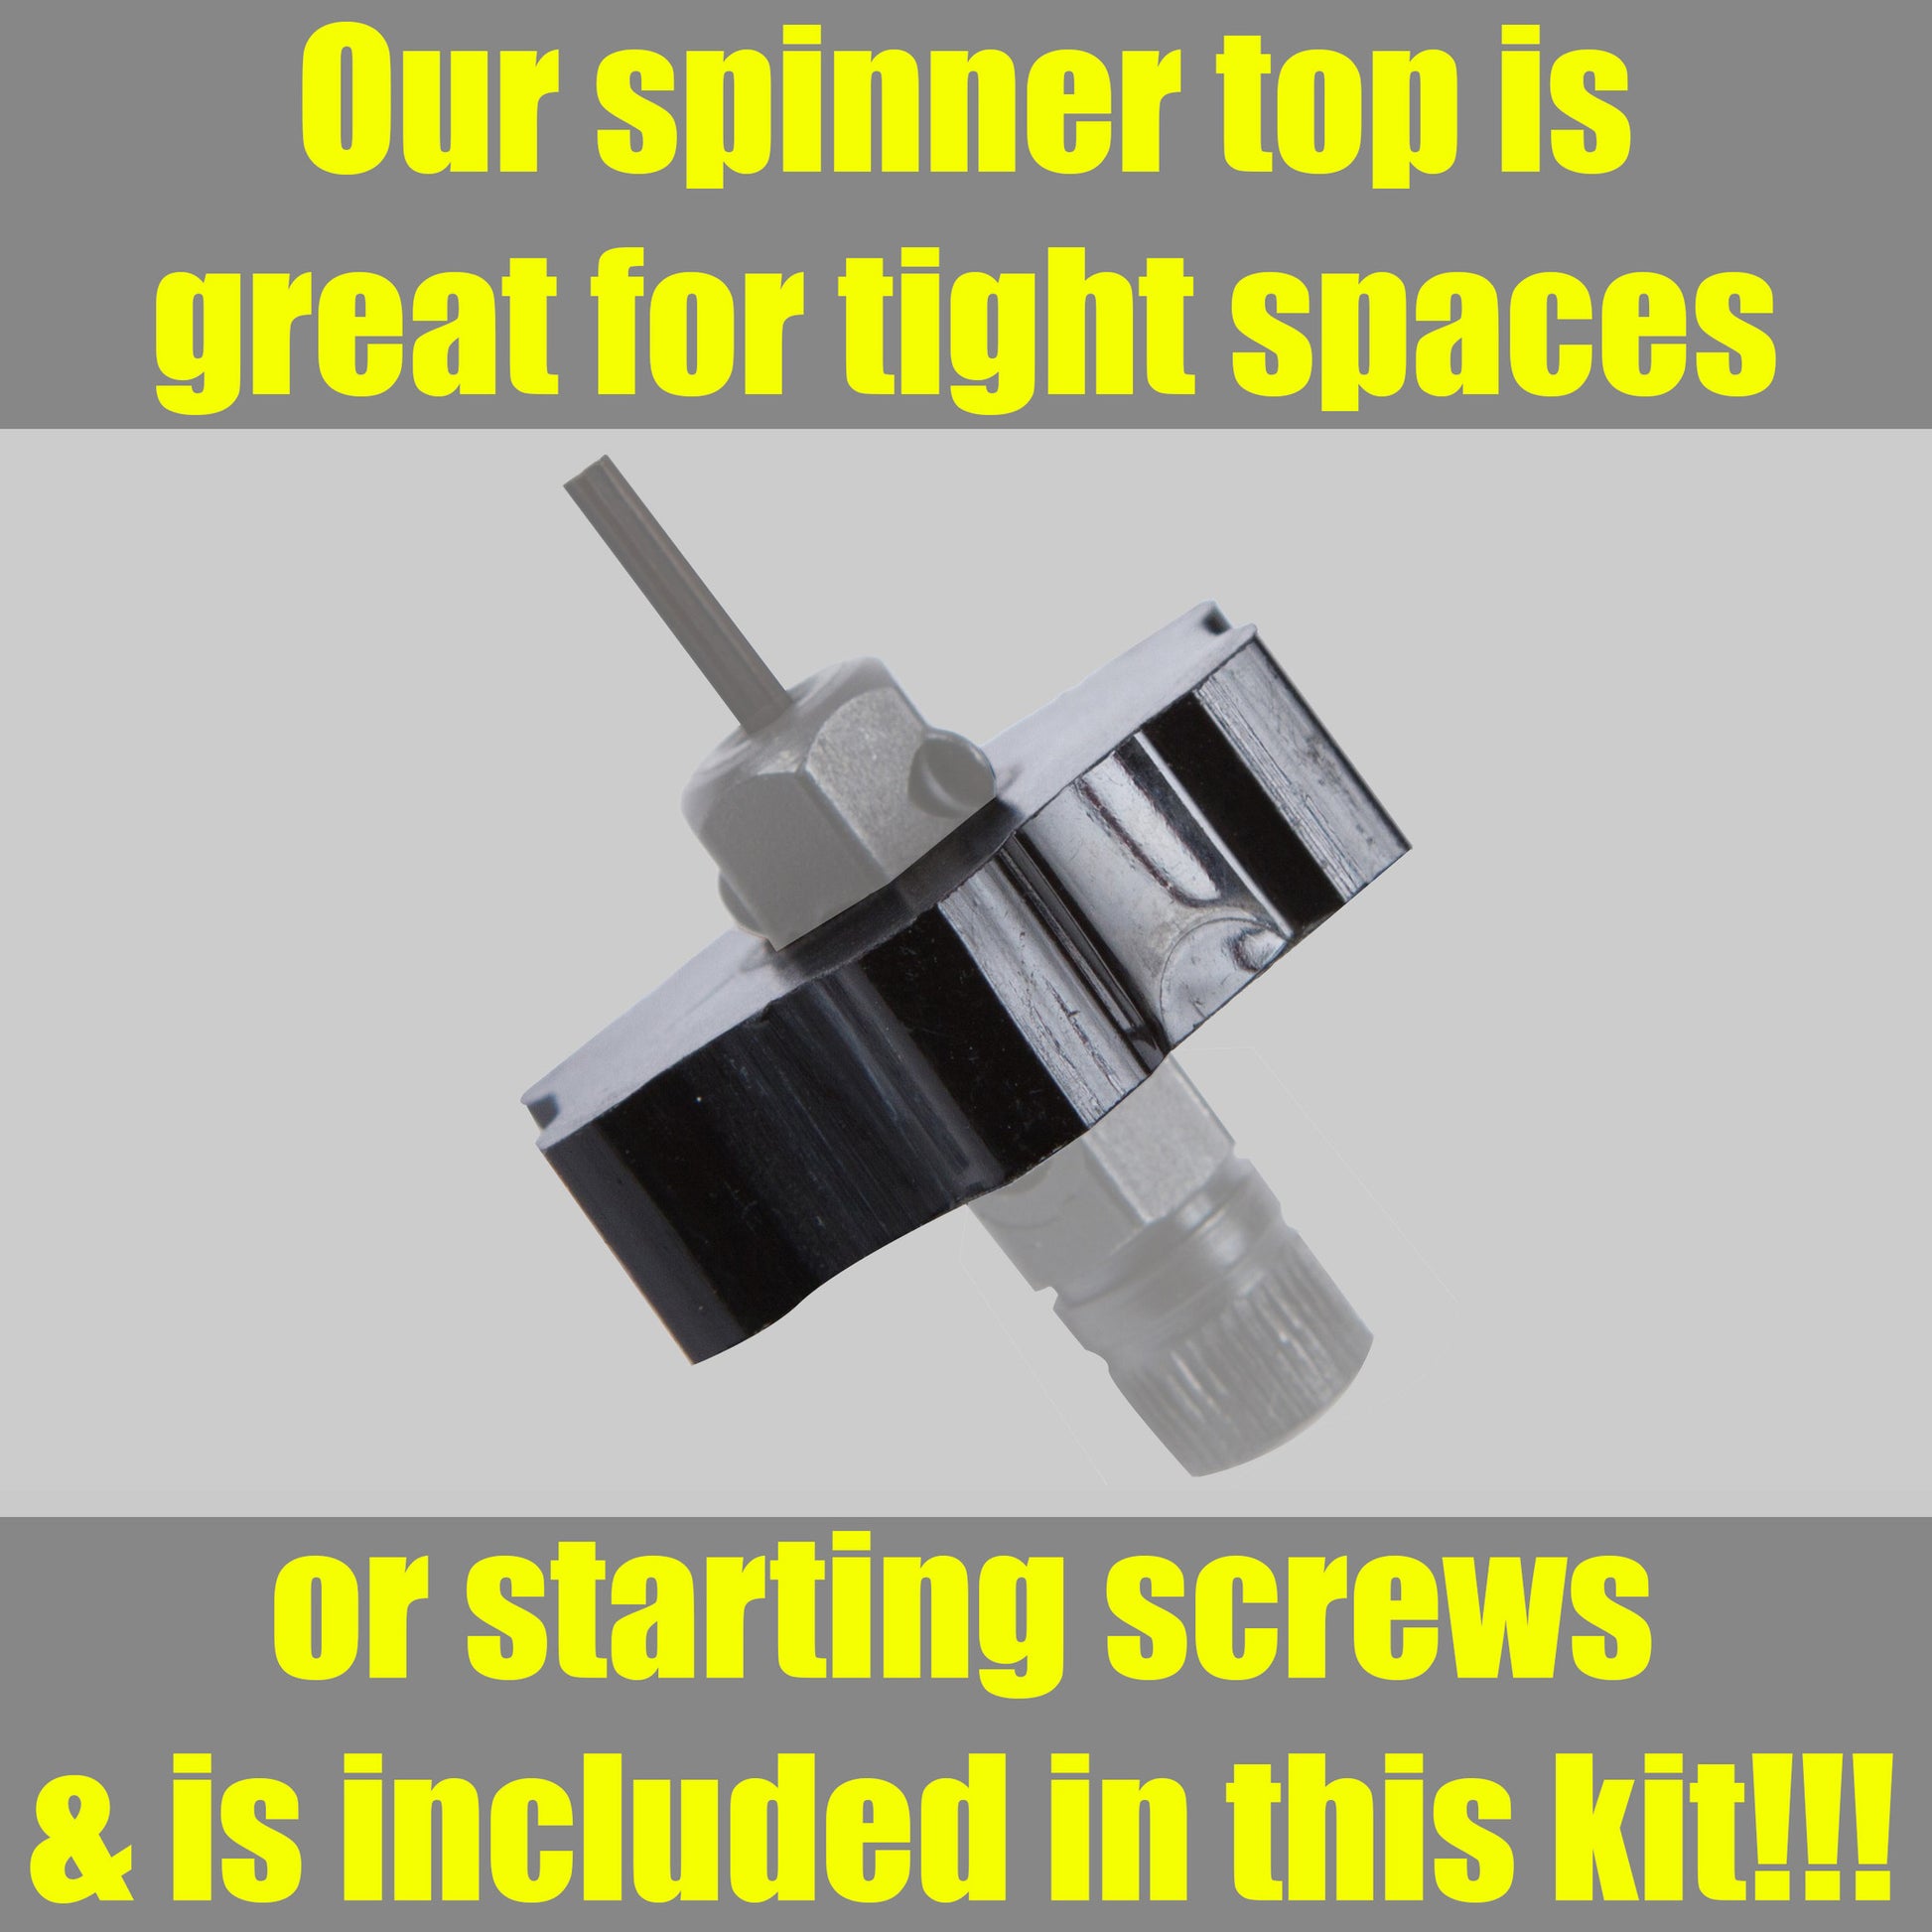 Spinner Top included in kit is great for tight spaces or starting screws | Chapman MFG